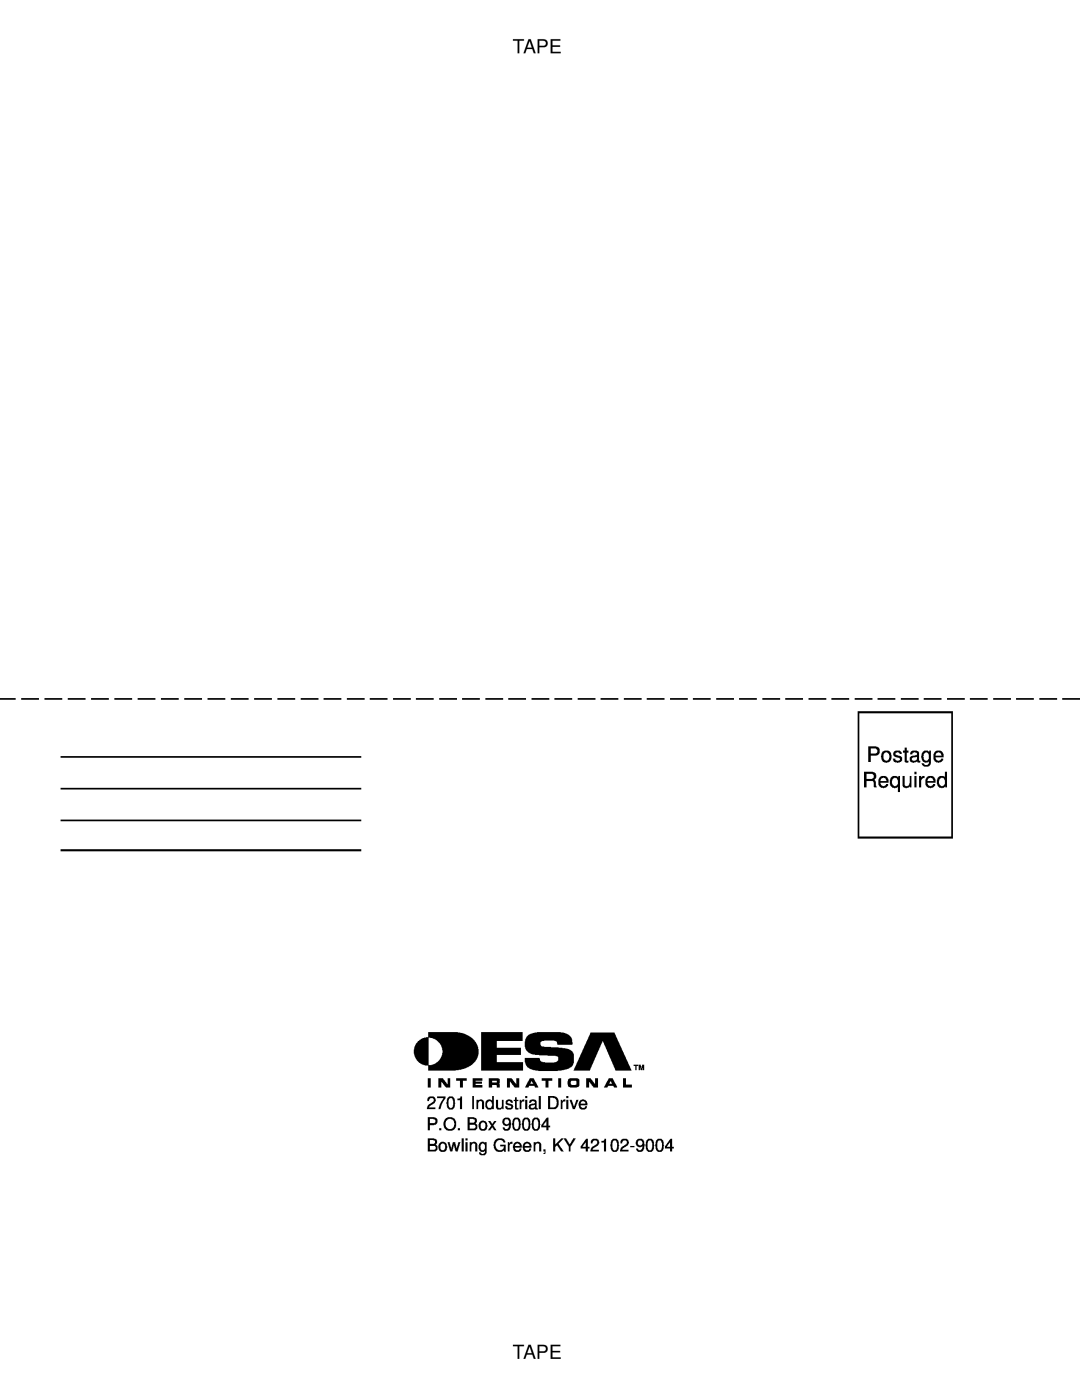 Desa PROPANE CONSTRUCTION HEATERS owner manual Postage Required, Tape 